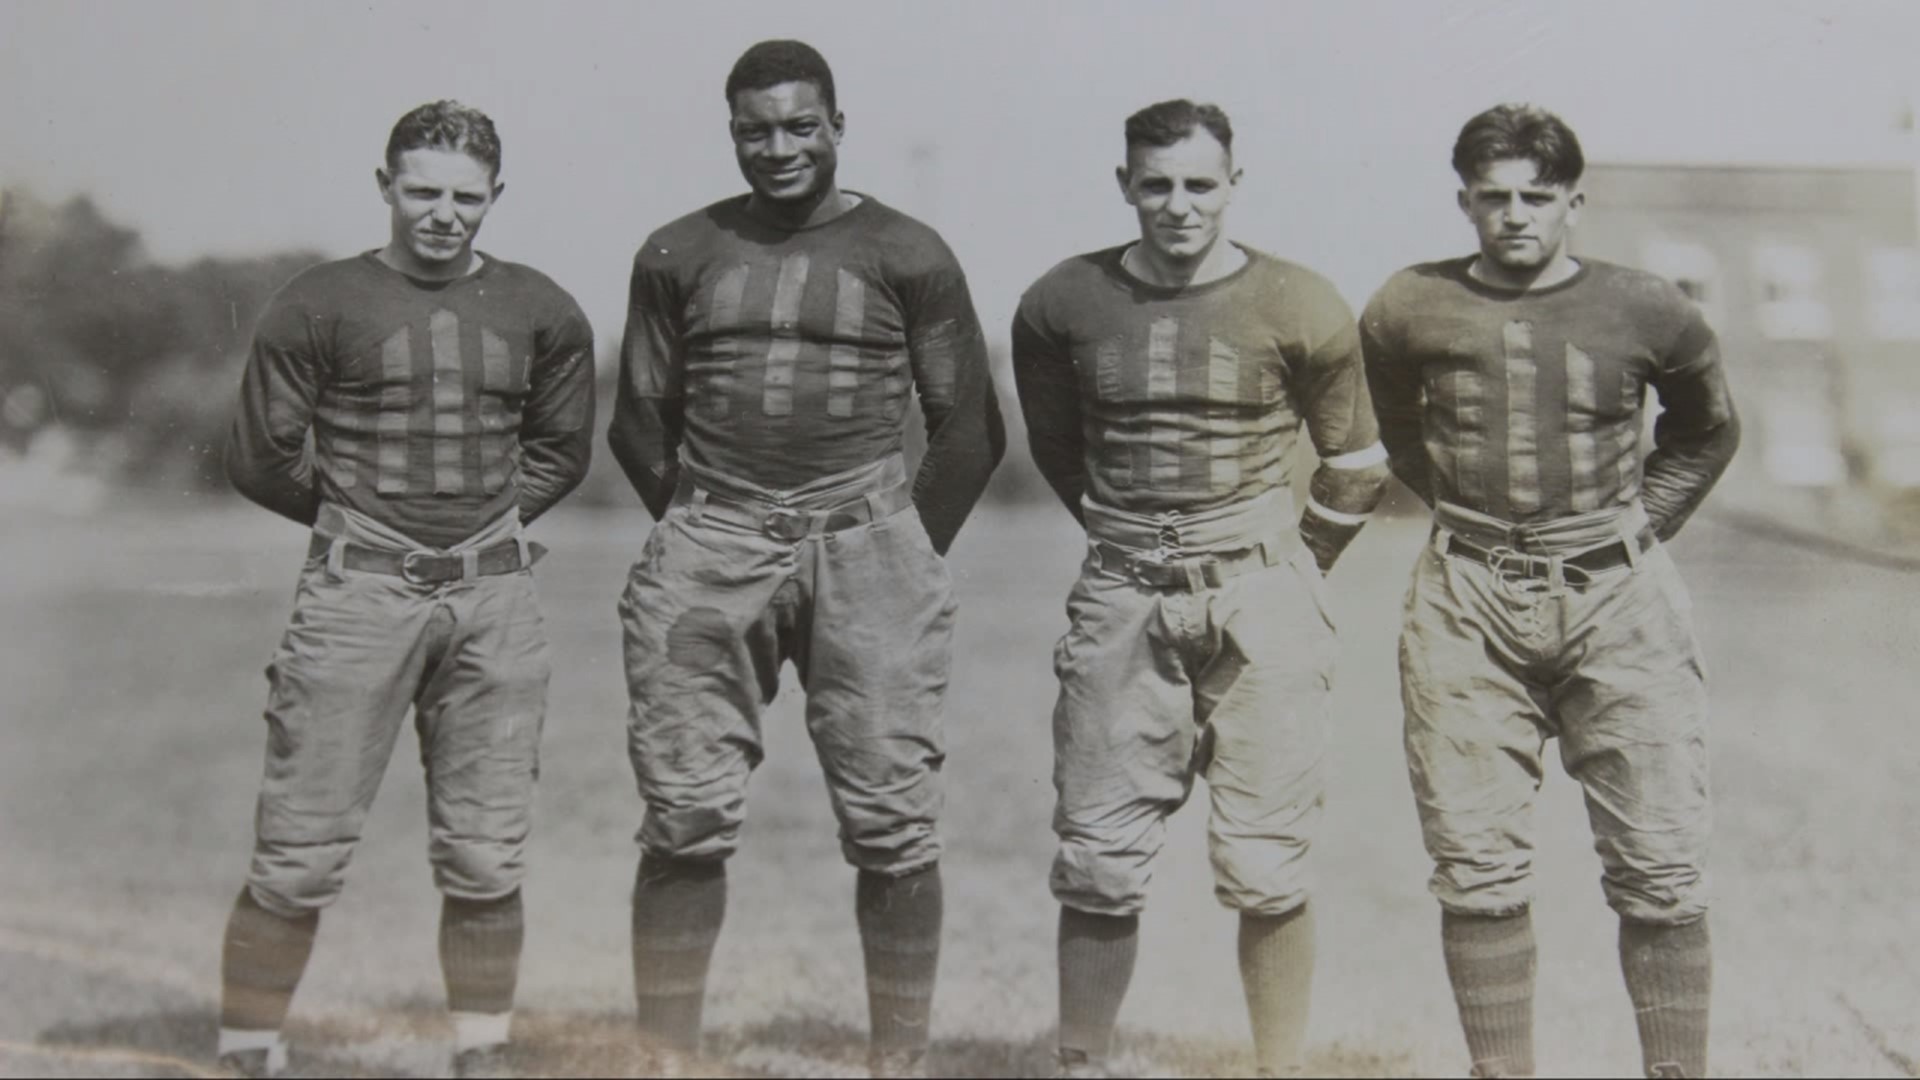 Monday, Oct. 8 marks the centennial anniversary of Jack Trice's death. Even 100 years after his death, Trice continues to influence ISU's football program.